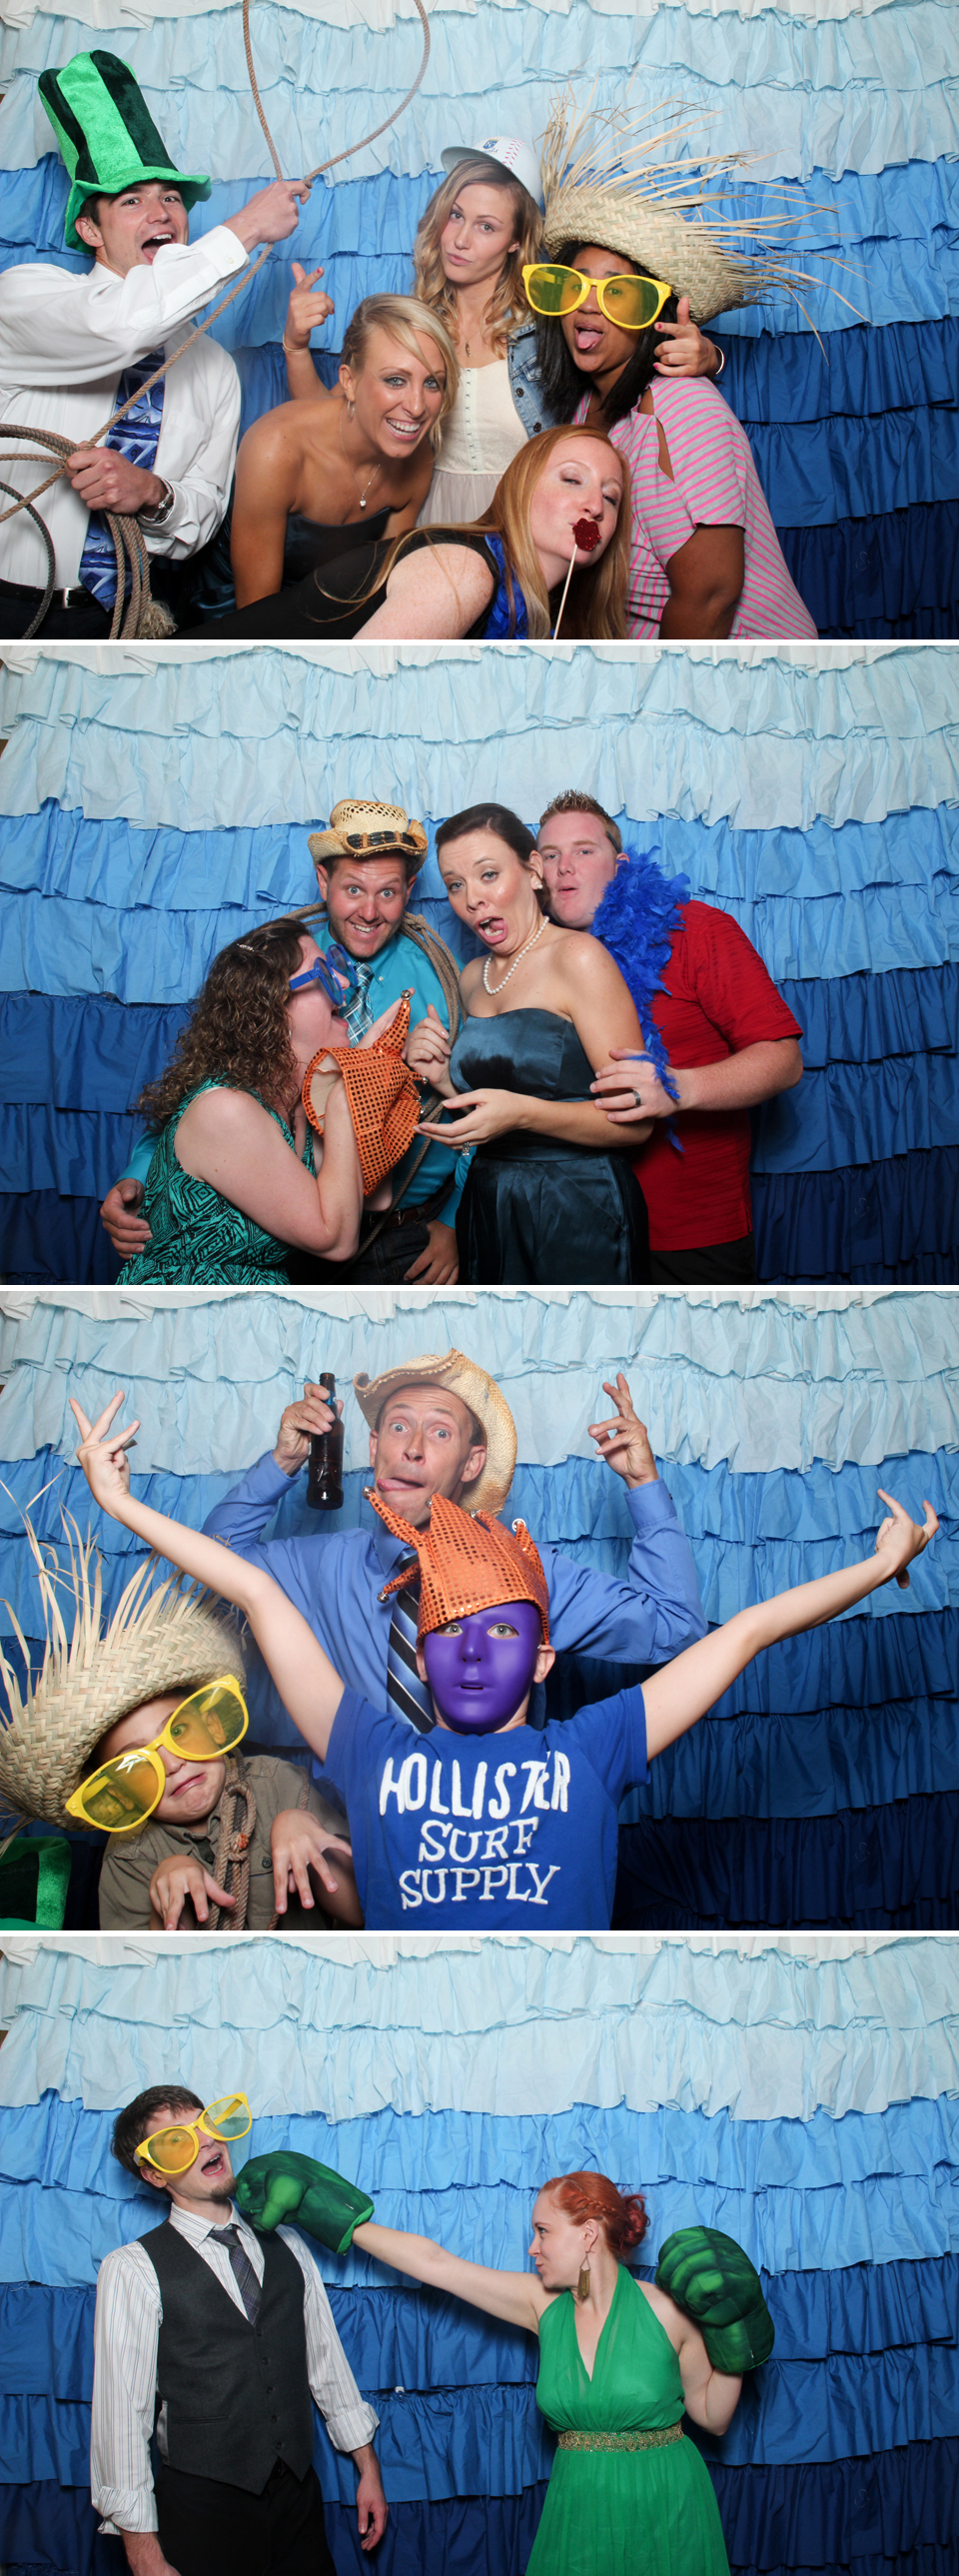 Cream Filling backdrop, Banana Who? Booth, KC photo booths, Most unique booth ideas, blue ruffles